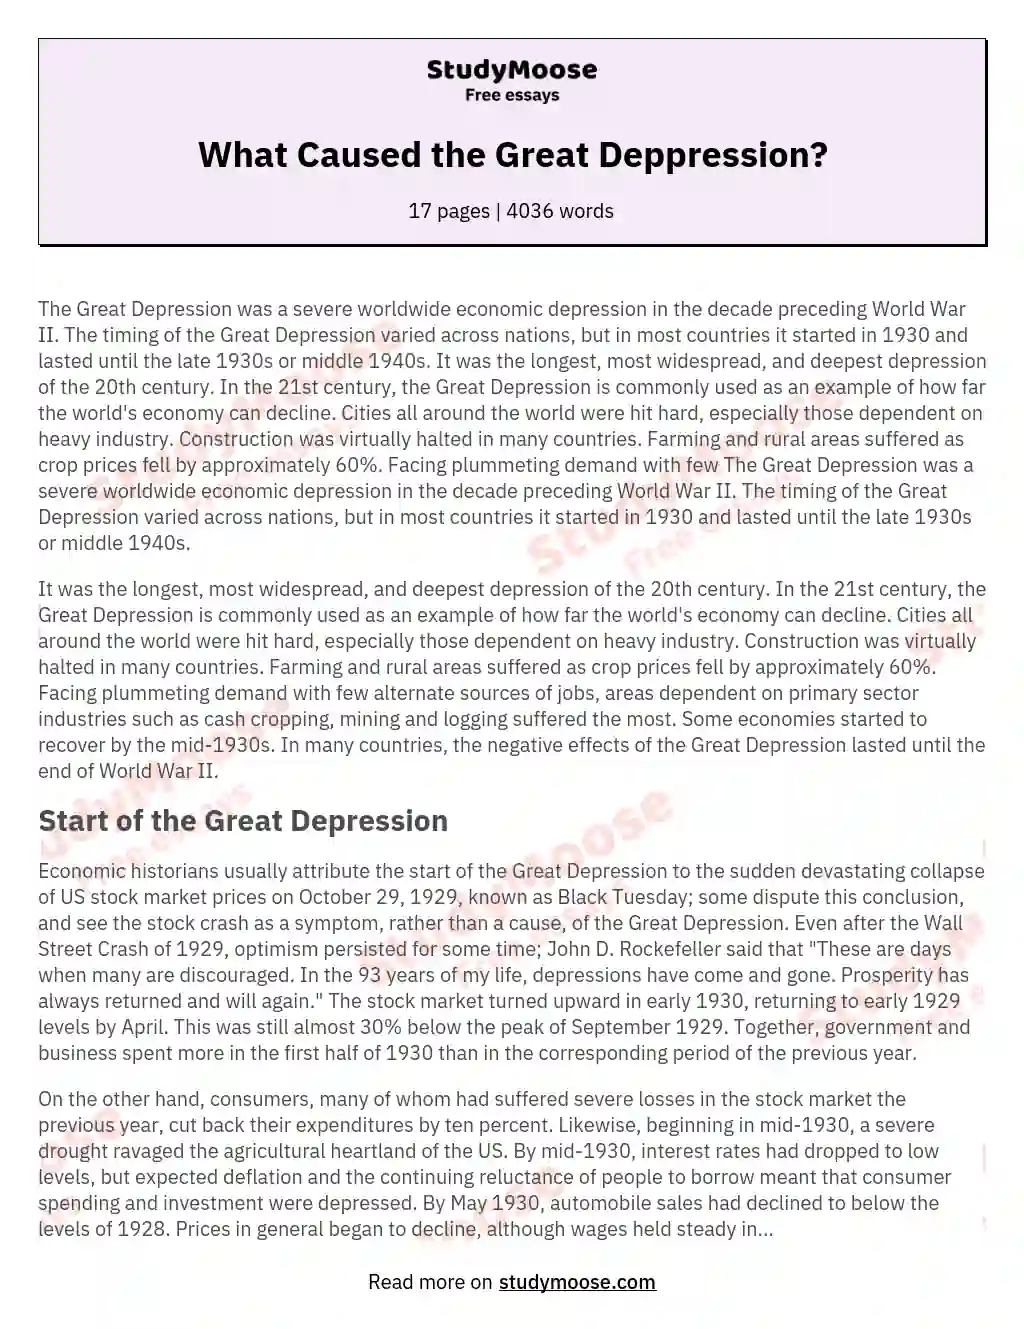 What Caused the Great Deppression? essay